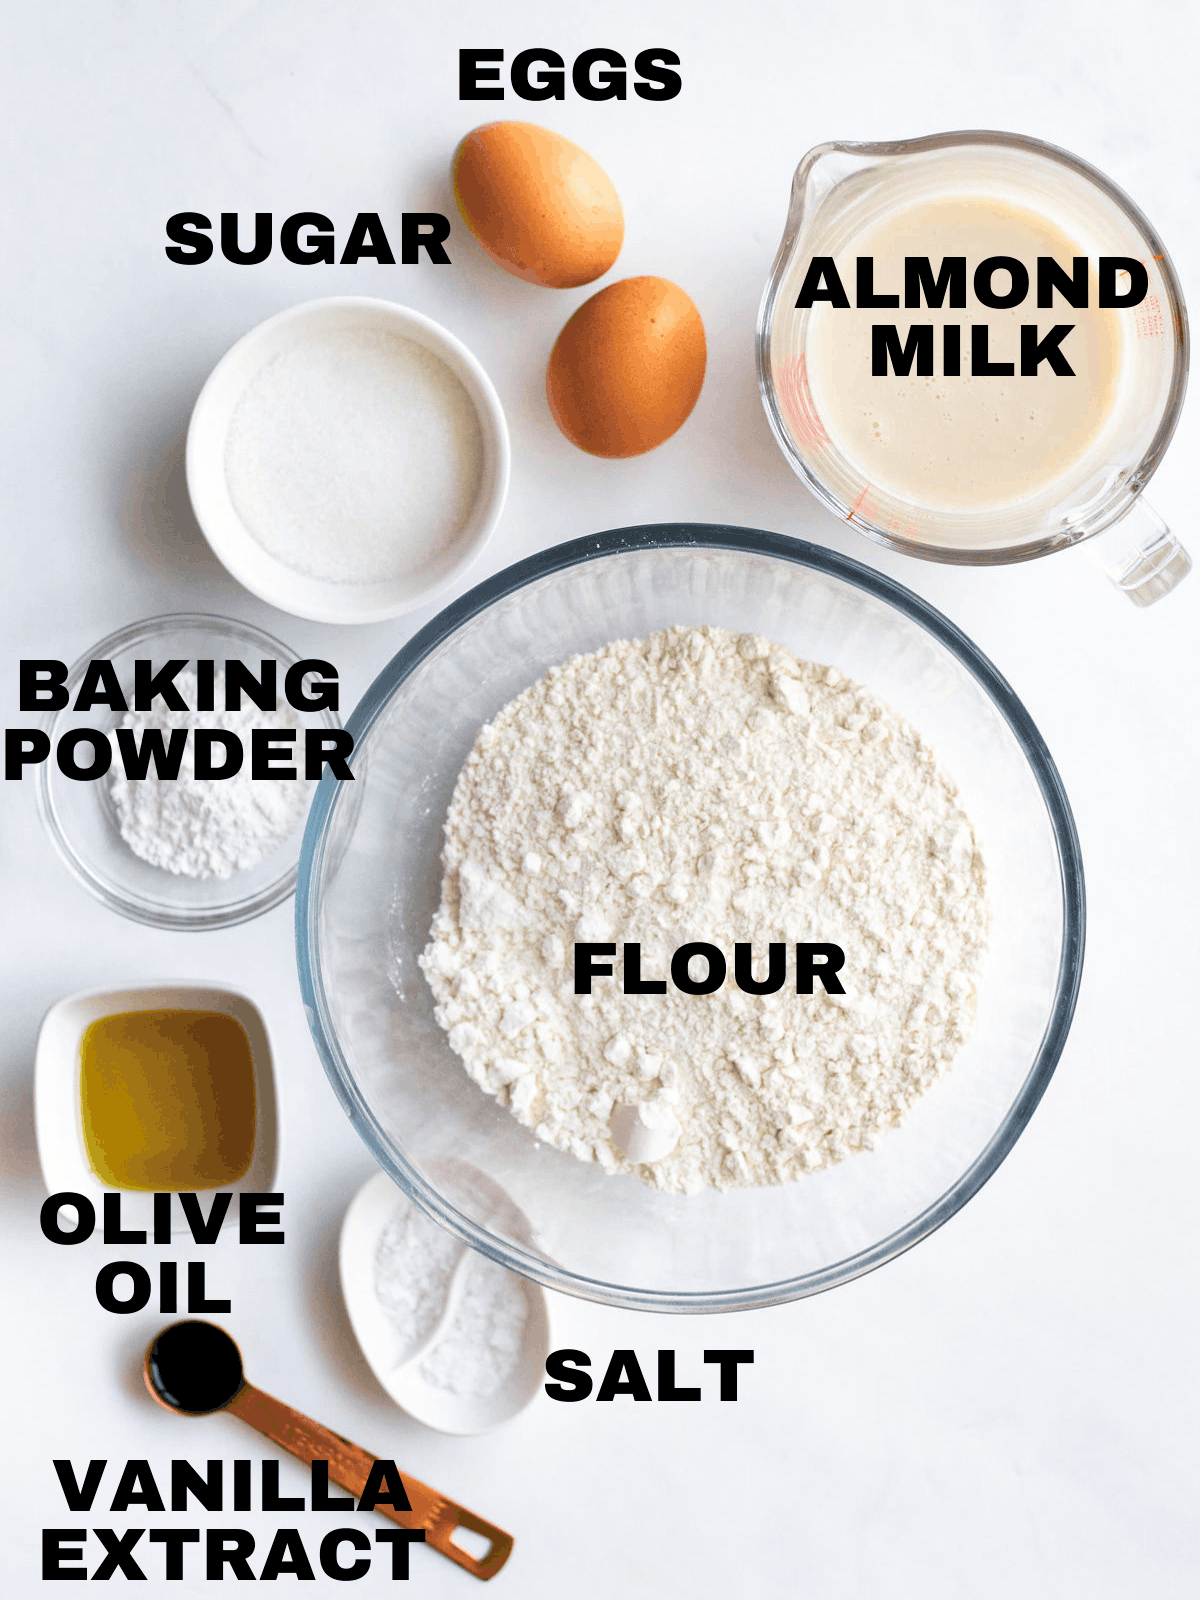 almond milk, flour, salt, extract, baking powder, olive oil, sugar, and eggs on a cutting board